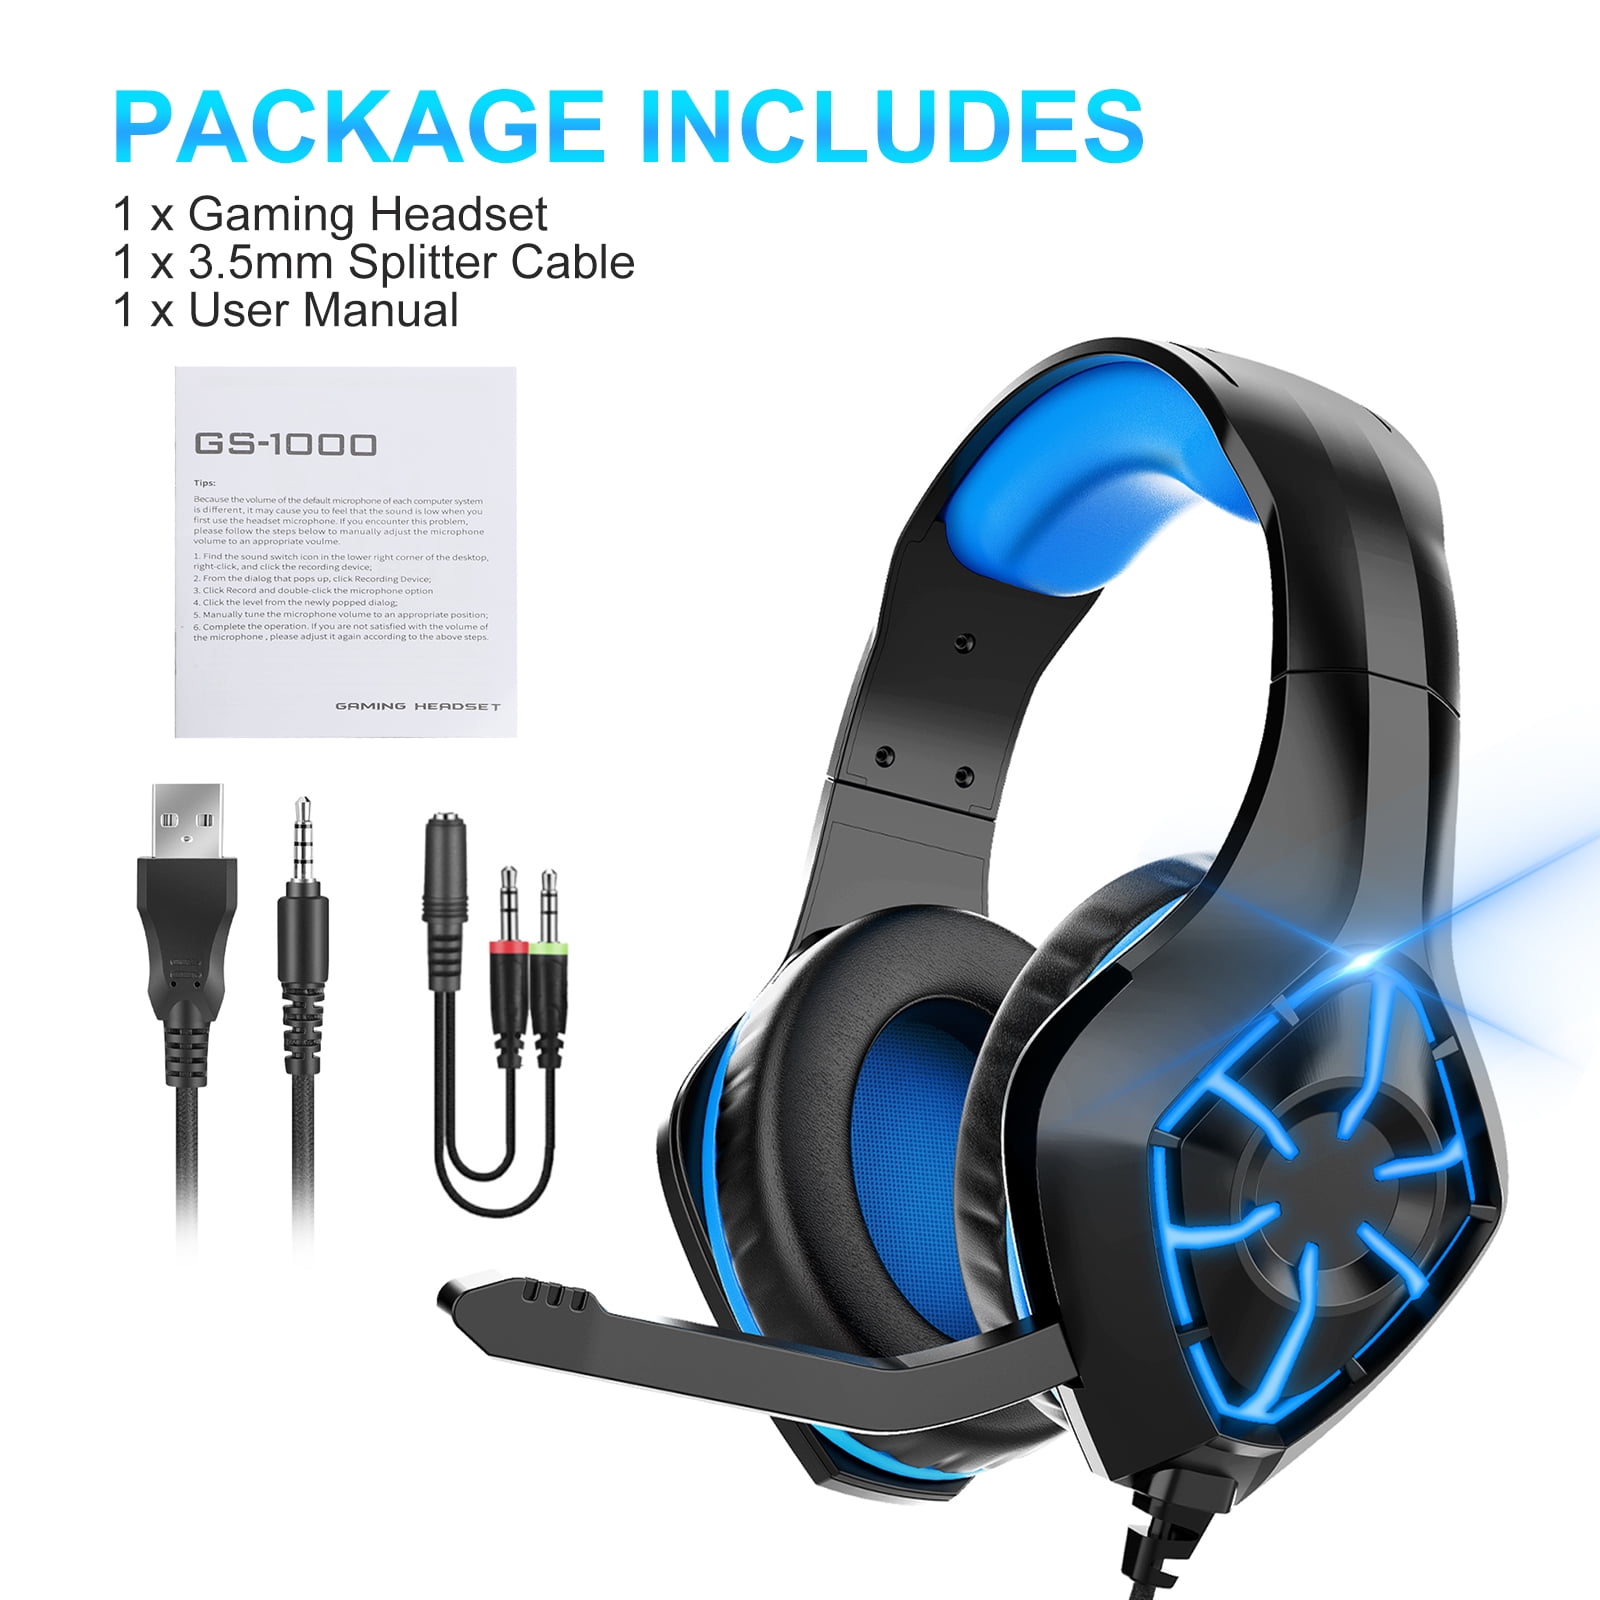 Professional Led Light Wired Gaming Headphones With Microphone For Computer  PS4 PS5 Xbox Bass Stereo PC Gaming Headset Gifts - AliExpress